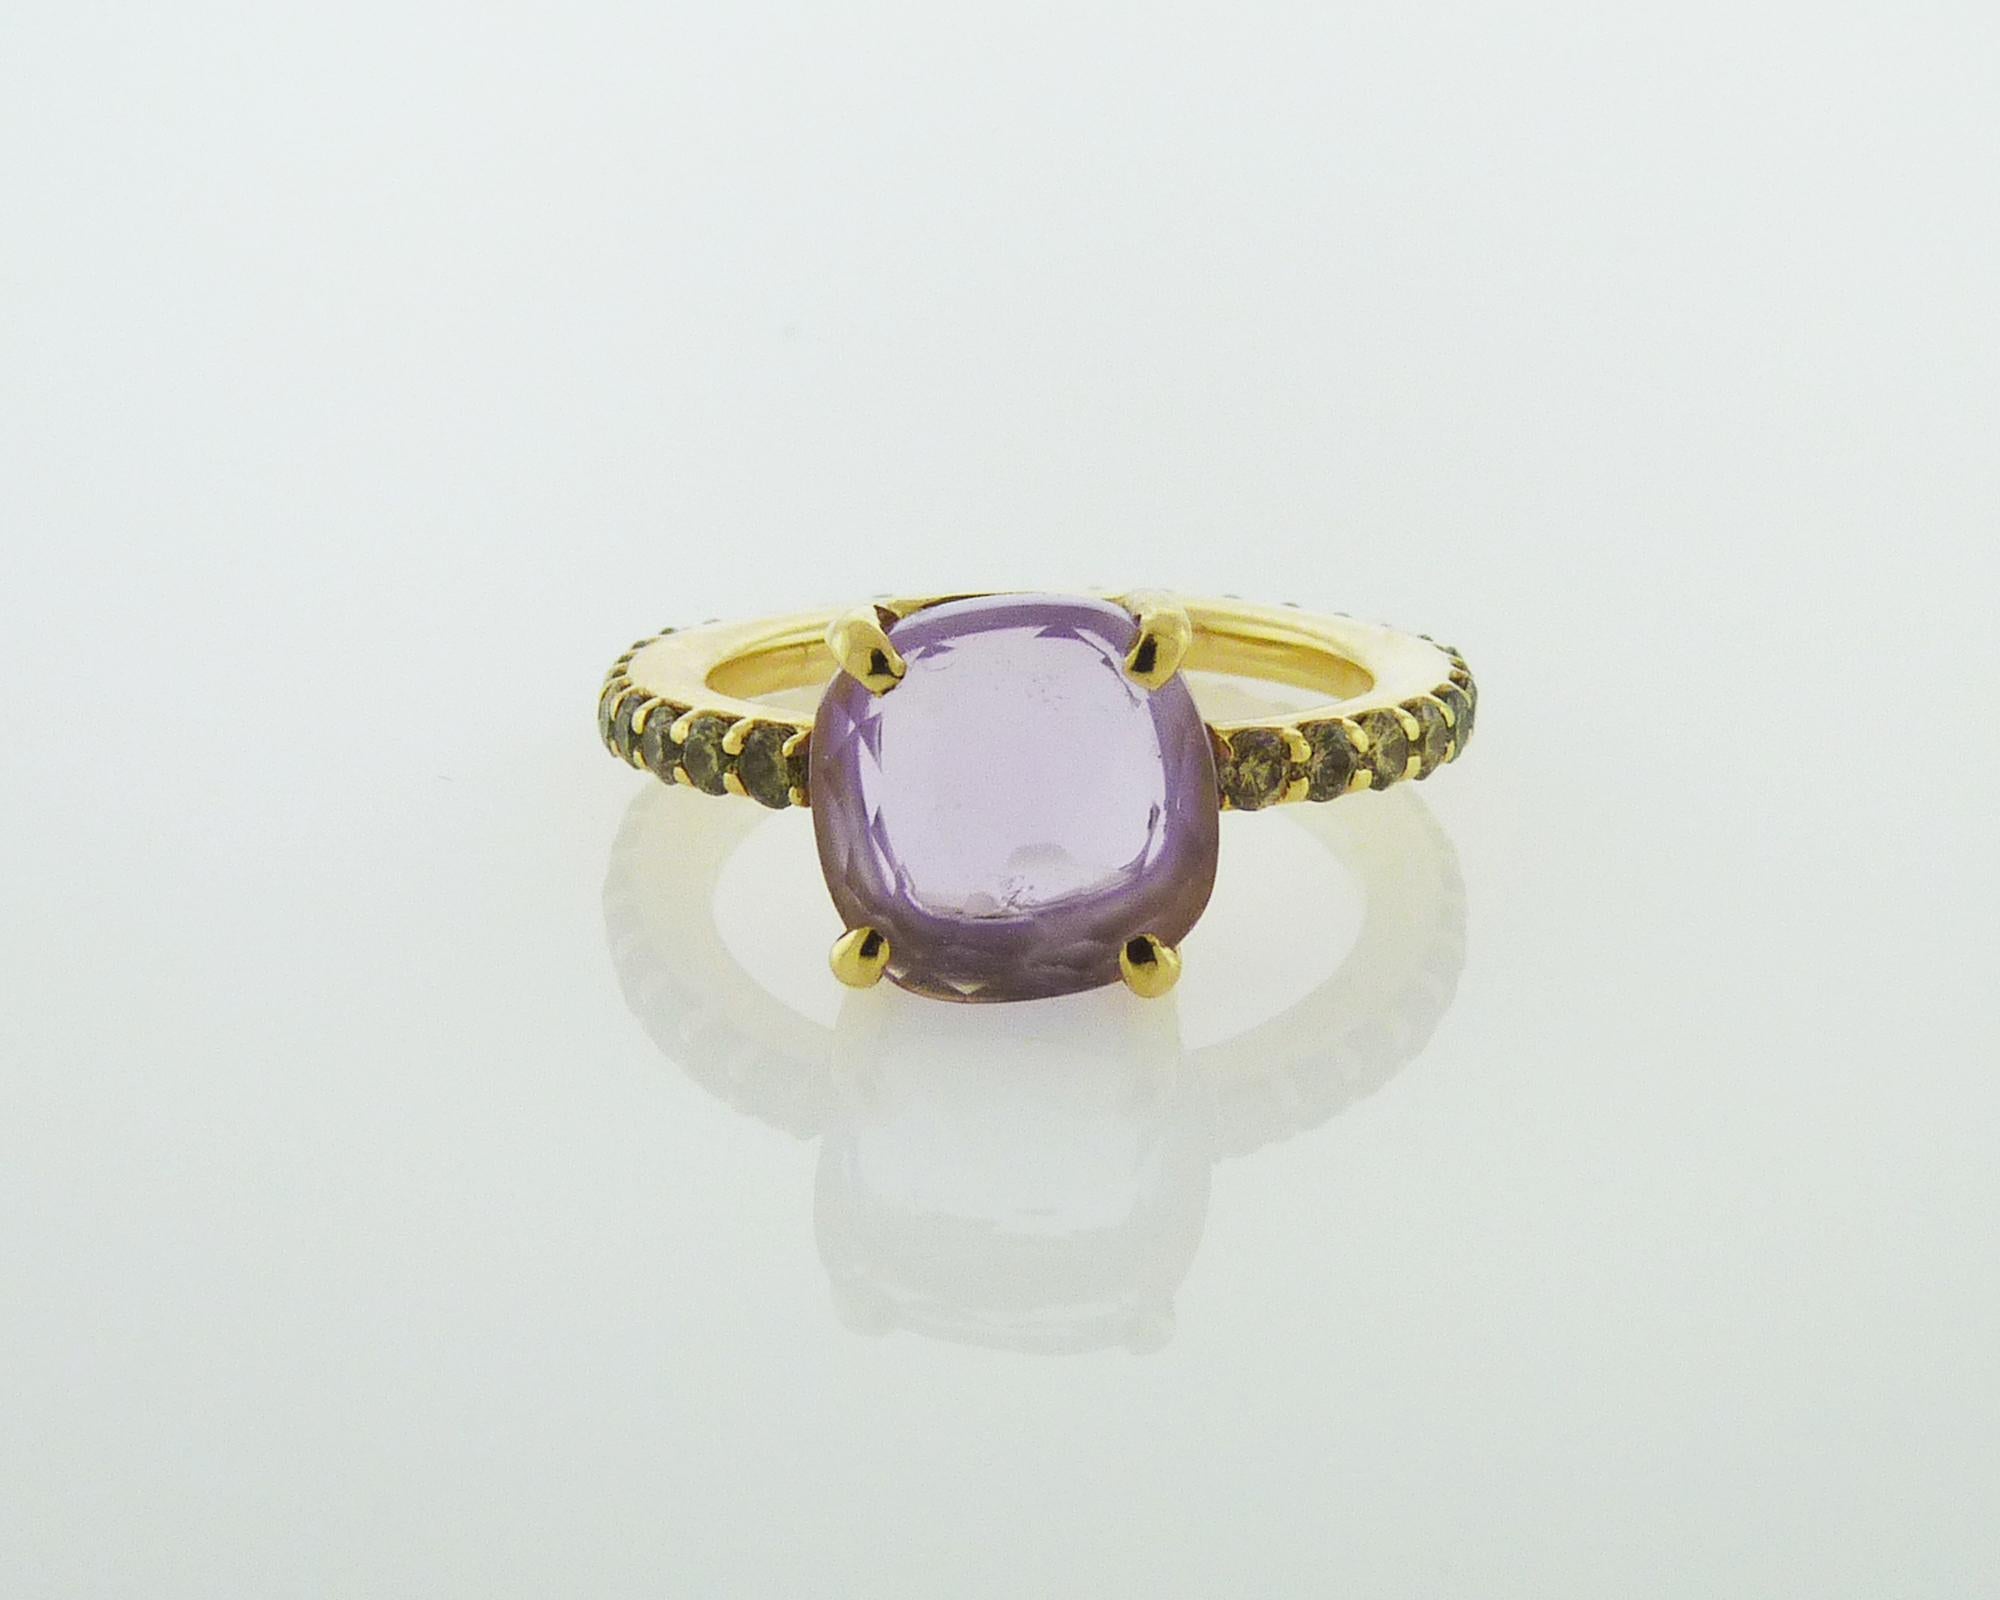 Beautiful ring created by Pomellato embellished with 3.50 carat cushion shape amethyst, 0.85 carat round yellow diamonds, clarity VS-SI. 

Weight of the ring is 4.50 grams.
Size 7.

Signed Pomellato.